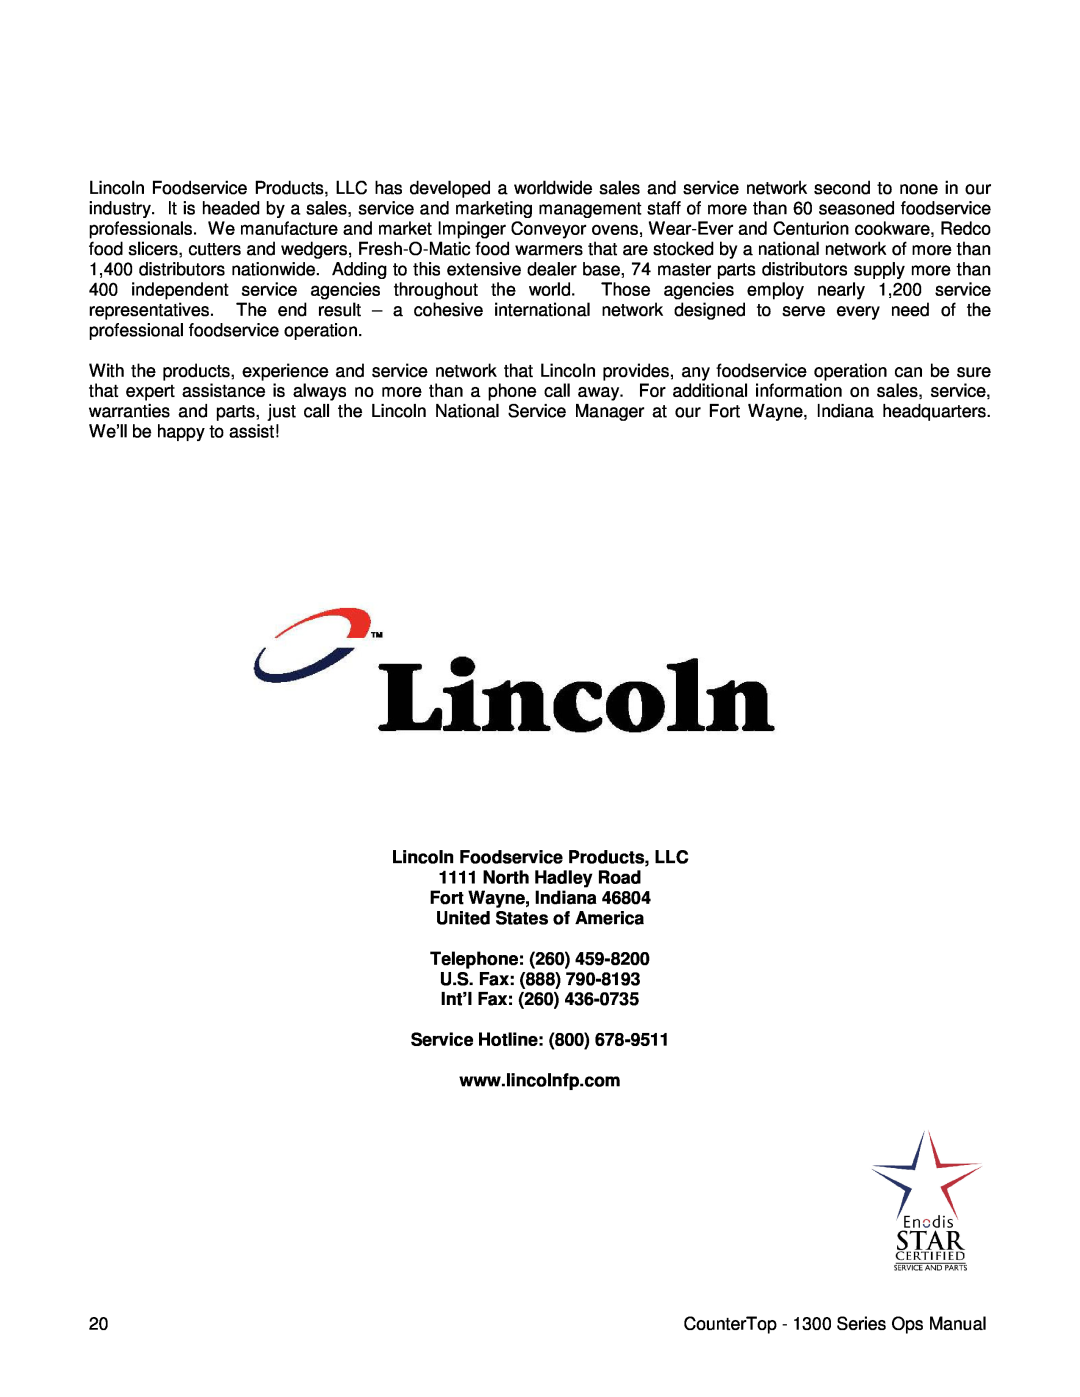 Lincoln 1300 Series operating instructions Lincoln Foodservice Products, LLC, North Hadley Road Fort Wayne, Indiana 